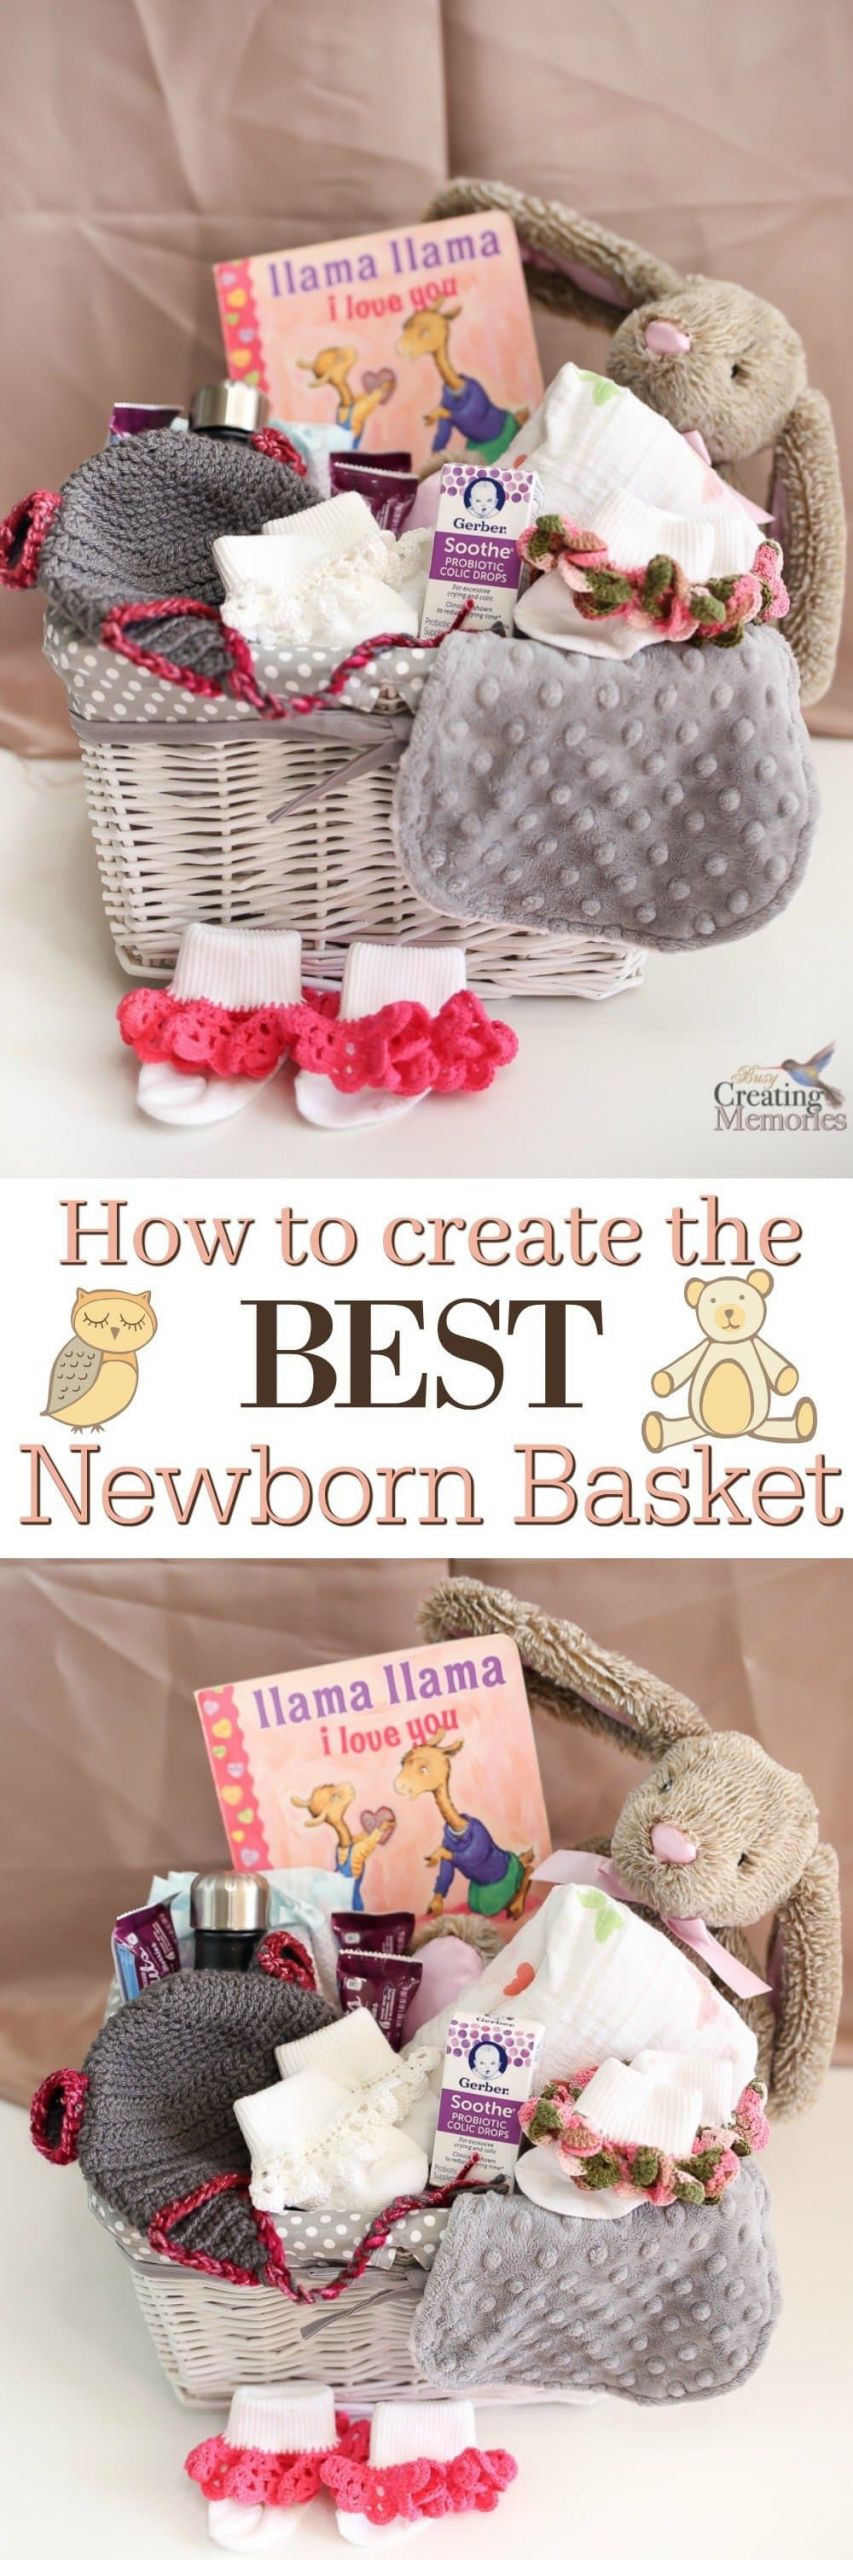 New Born Baby Gift Ideas
 How to create the BEST Newborn Gift Basket that Mom will love